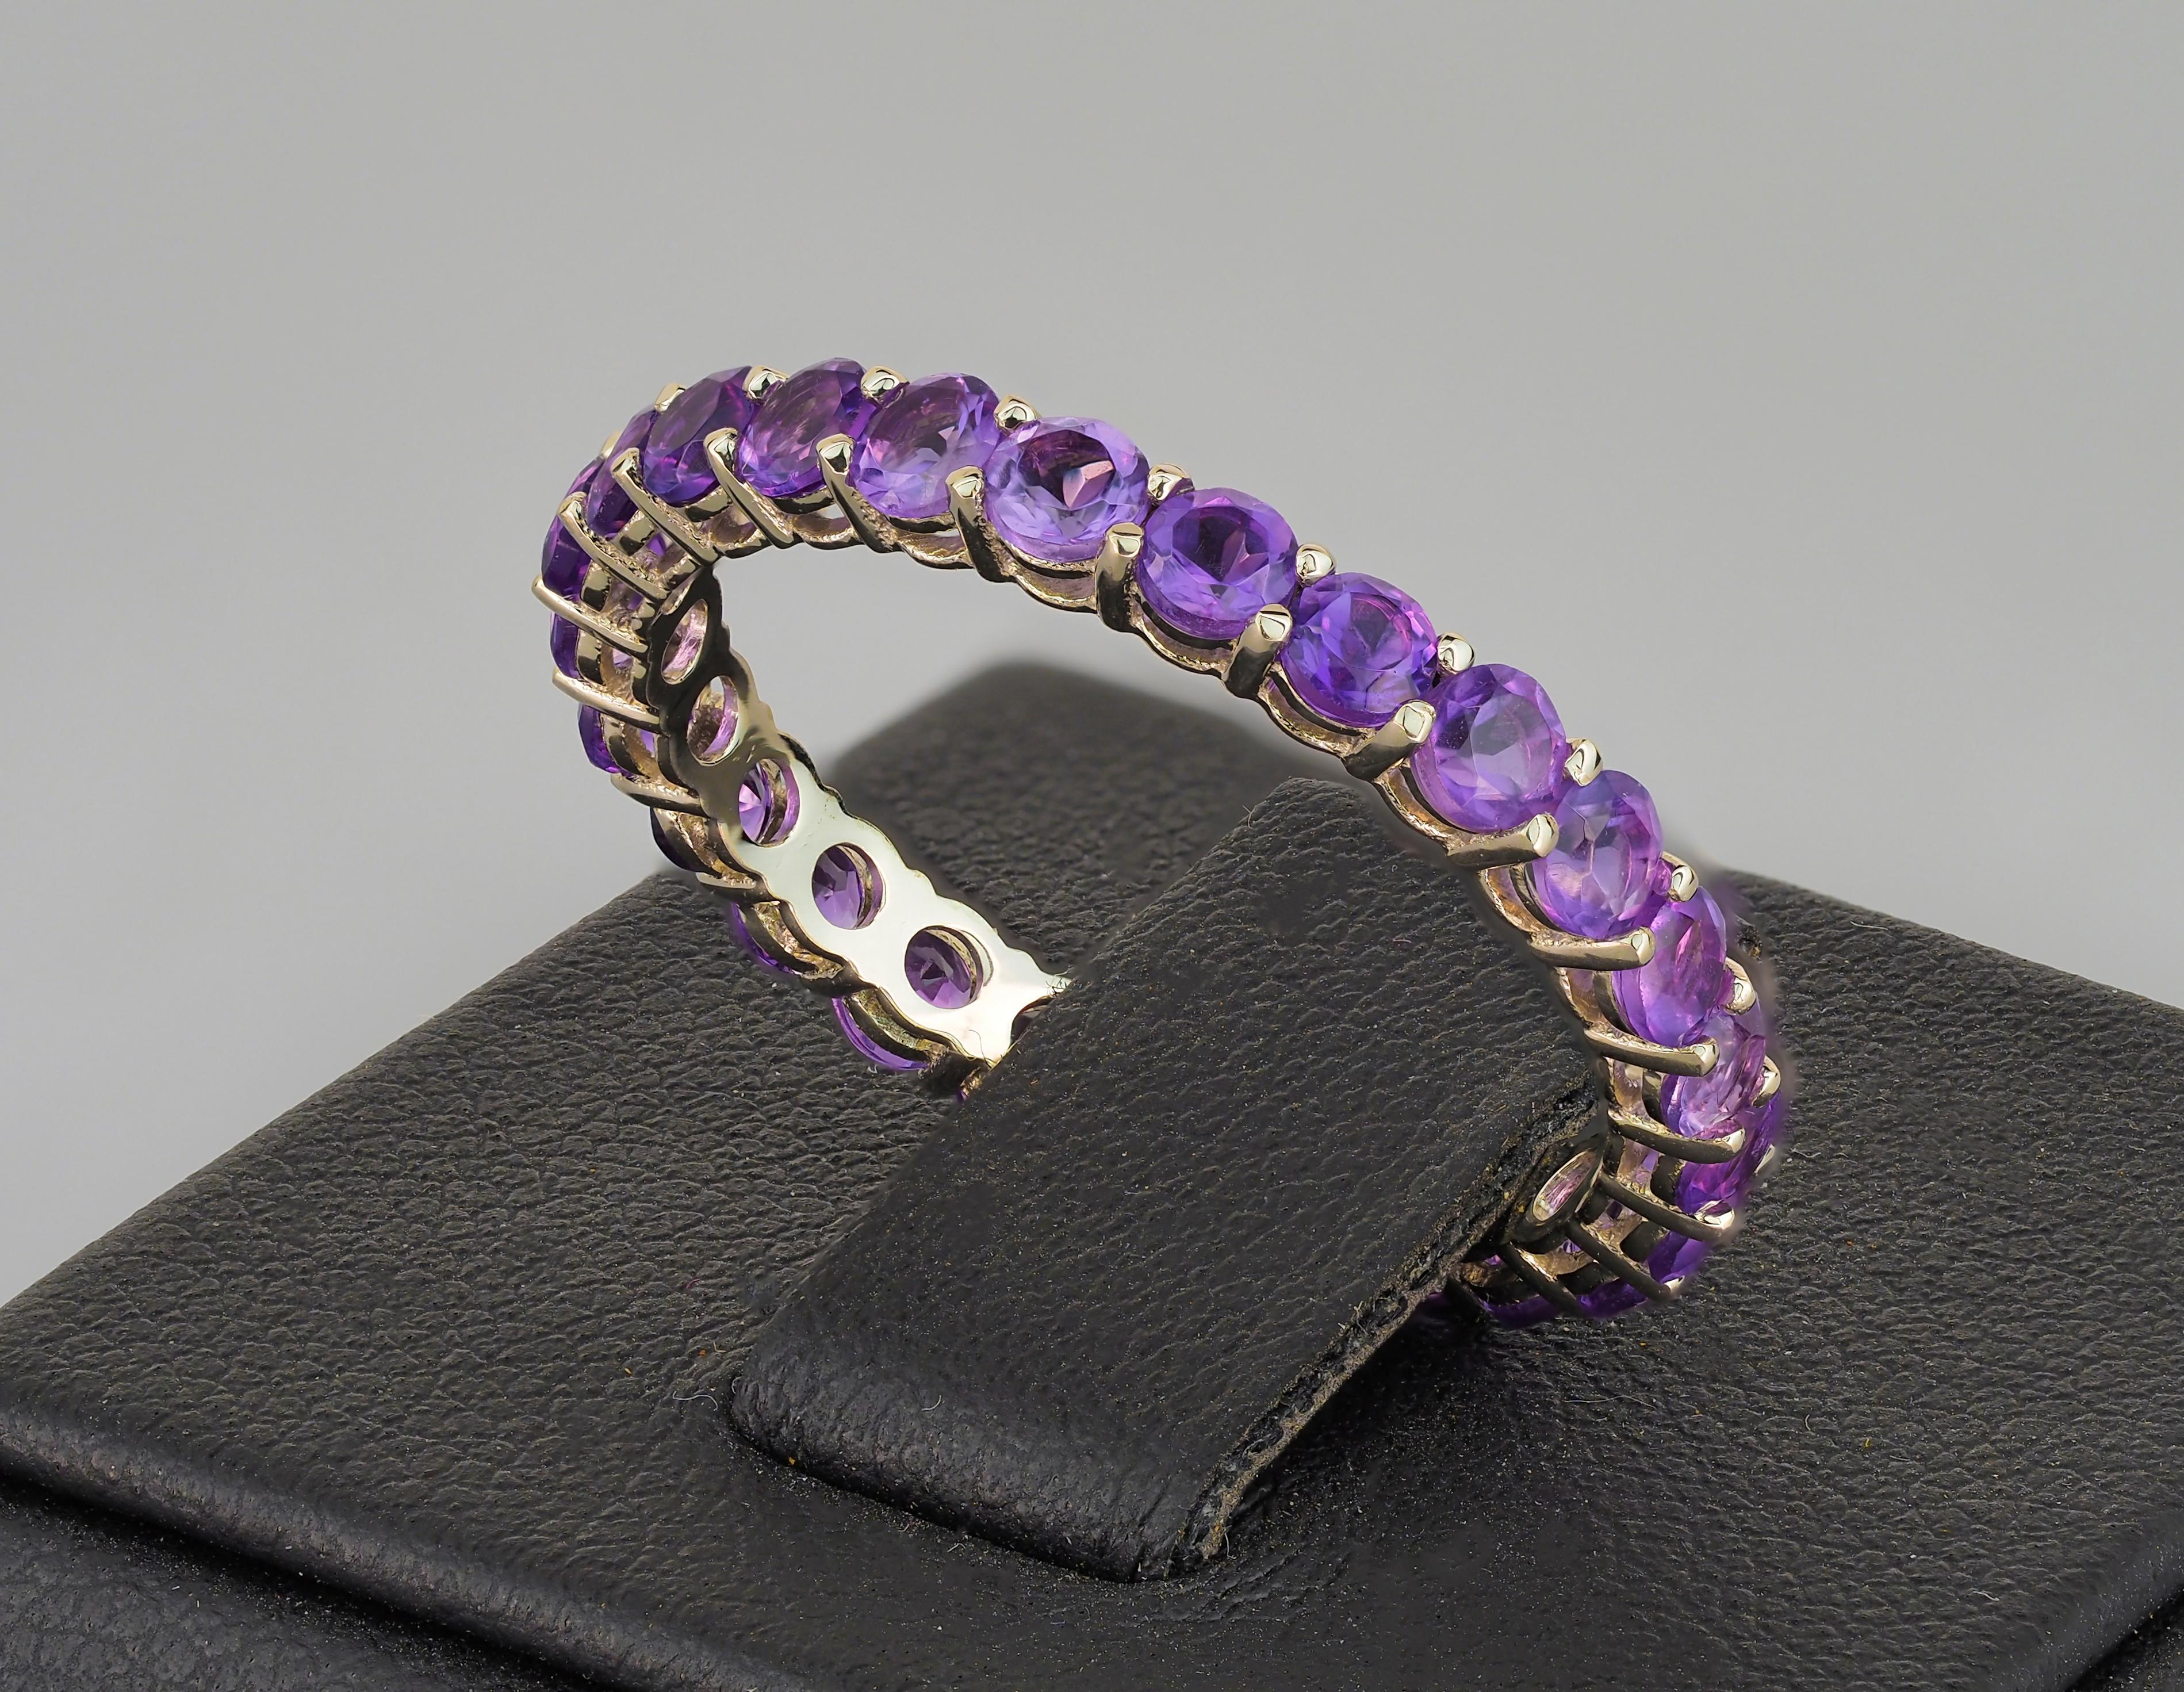 For Sale:  Amethyst eternity ring in 14k gold.  4